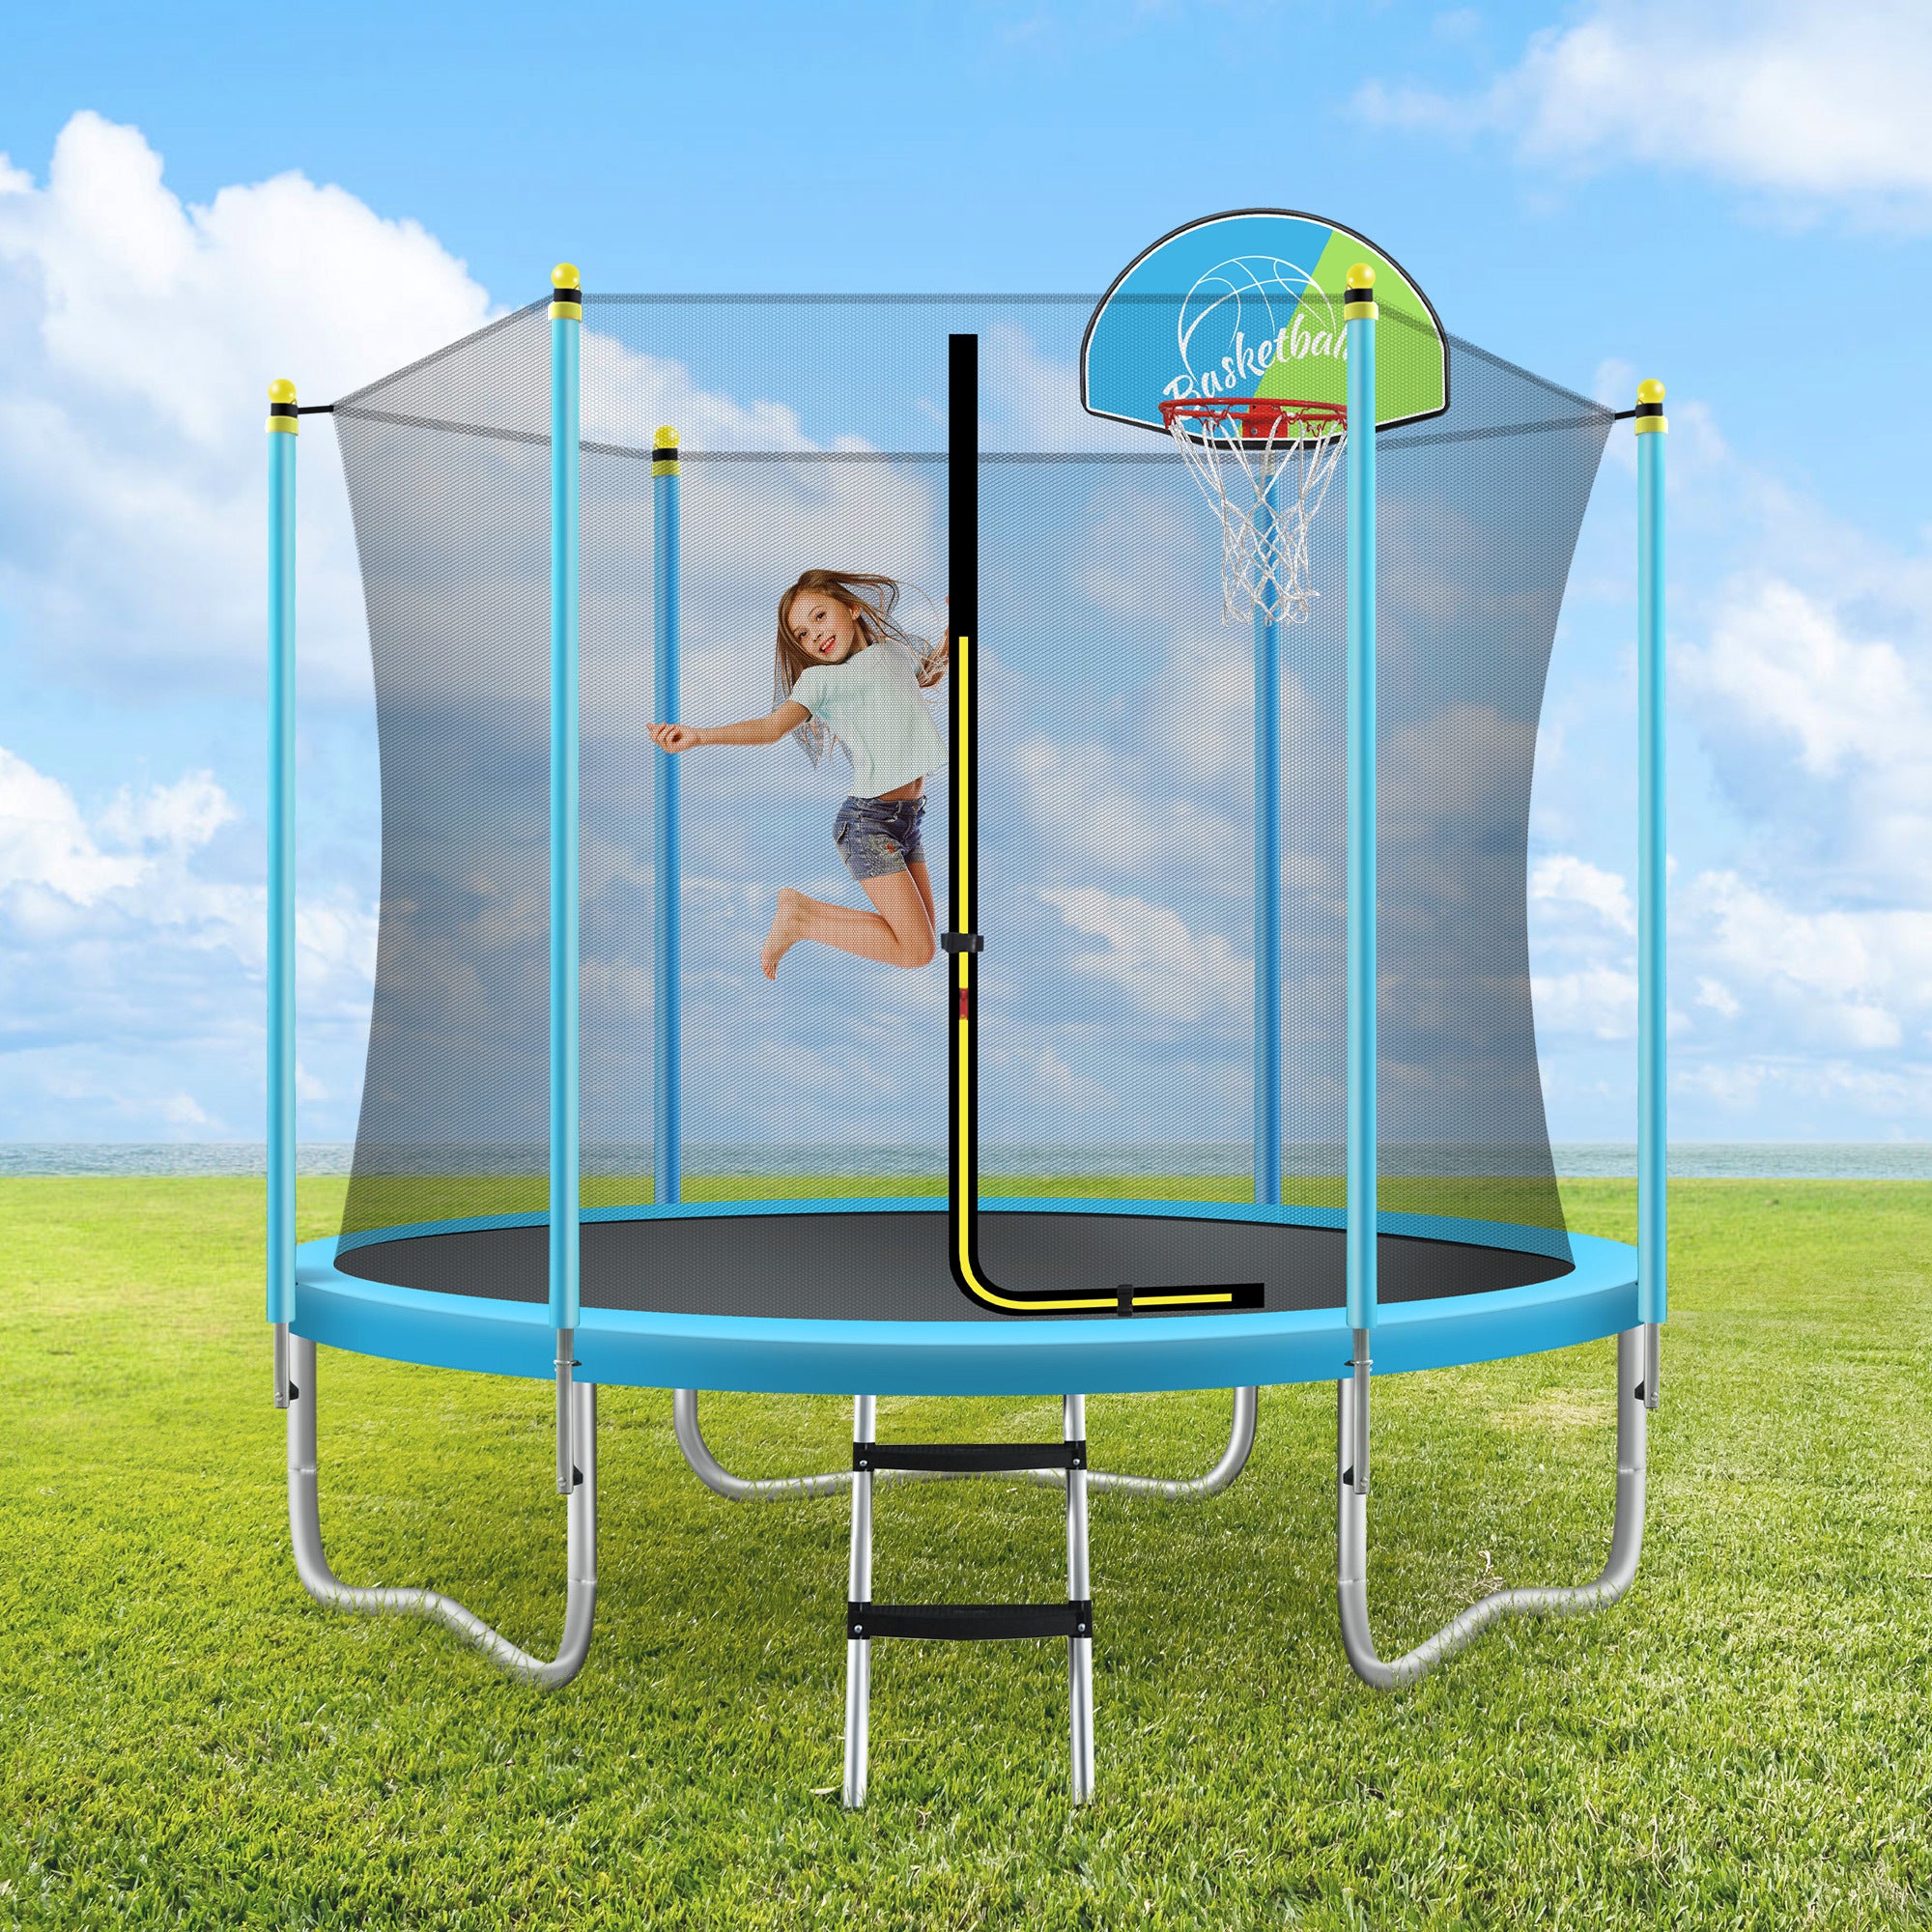 8FT-Trampoline-for-Kids-with-Safety-Enclosure-Net,-Basketball-Hoop-and-Ladder,-Easy-Assembly-Round-Outdoor-Recreational-Trampoline-Exercise-&-Fitness